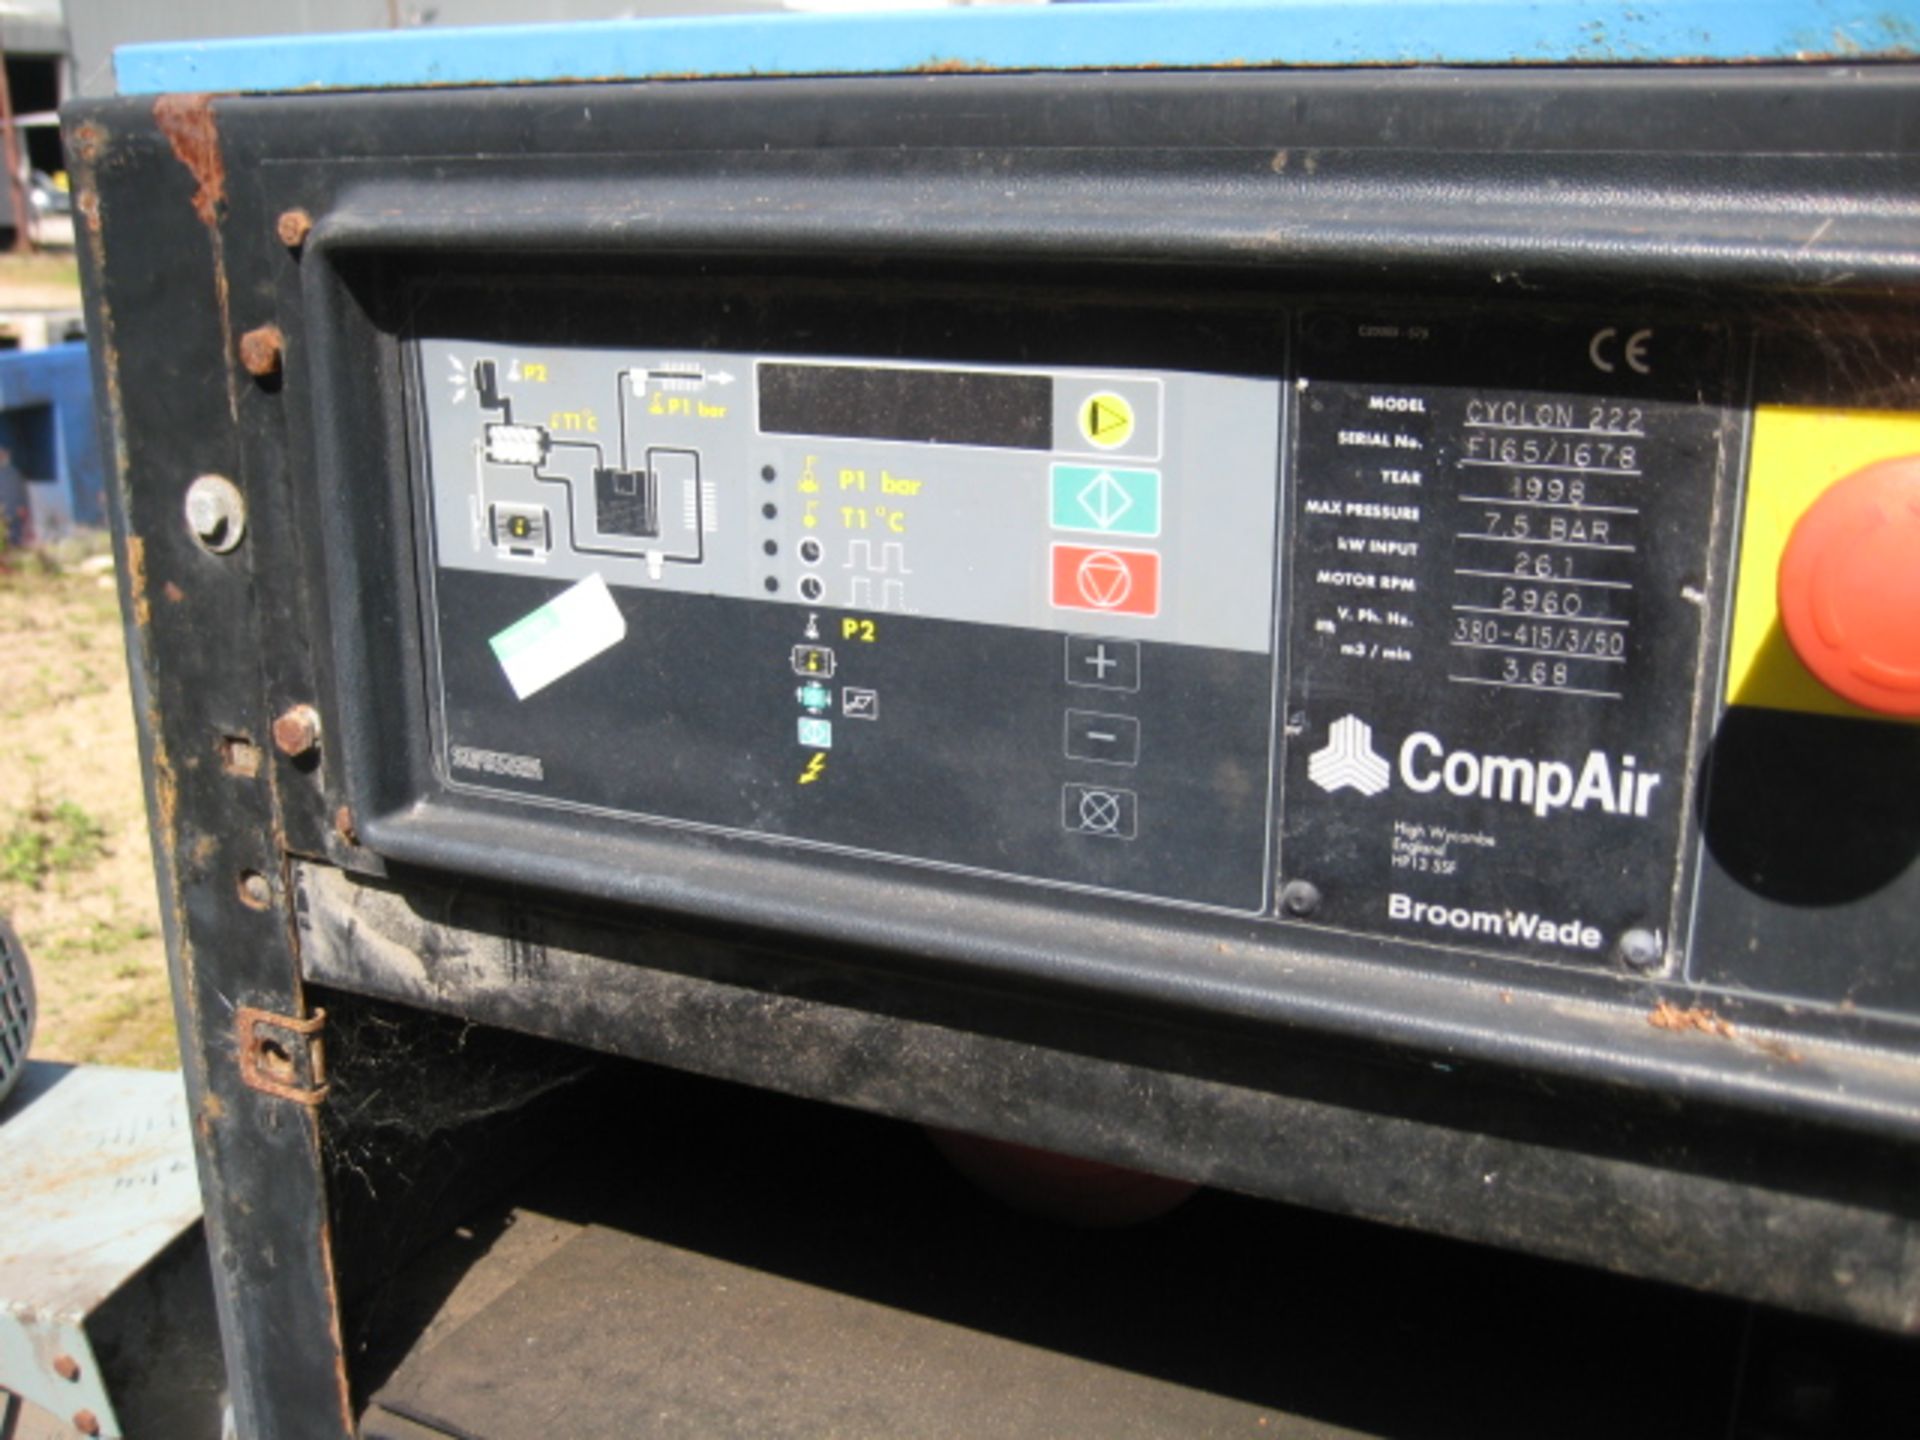 Broomwade Compair Cyclon 22 Compressor, serial no. F165/1678, year of manufacture 1998, in - Bild 3 aus 5